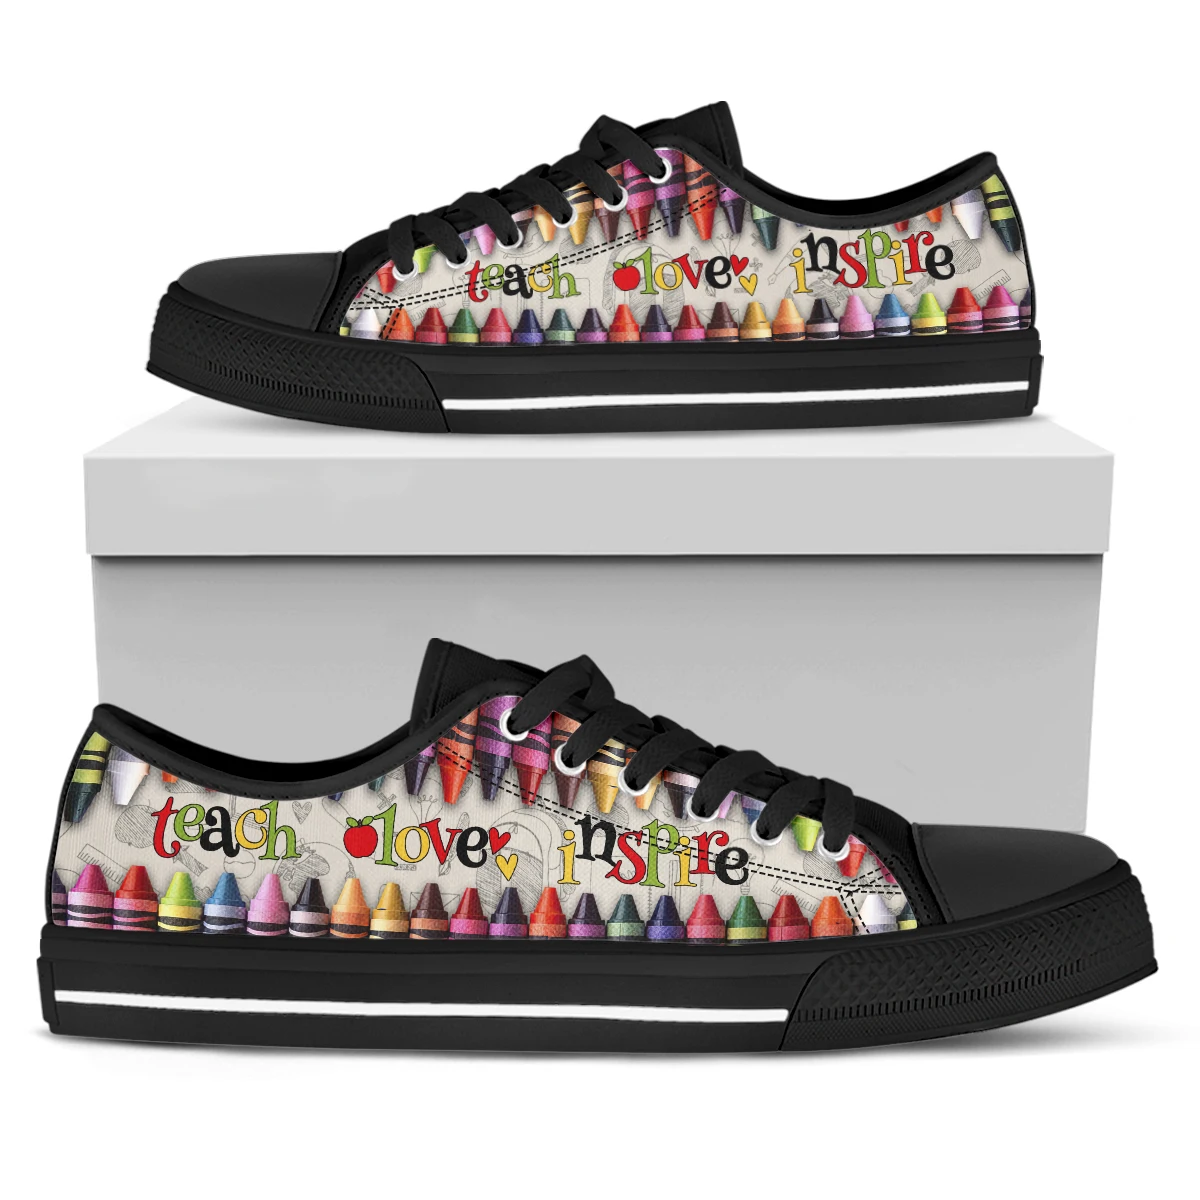 

ELVISWORDS Colorful Pastel Print Black Moccasin Flats Lightweight Lace Up Outdoor Sneakers Comfortable Low Top Women's Shoes